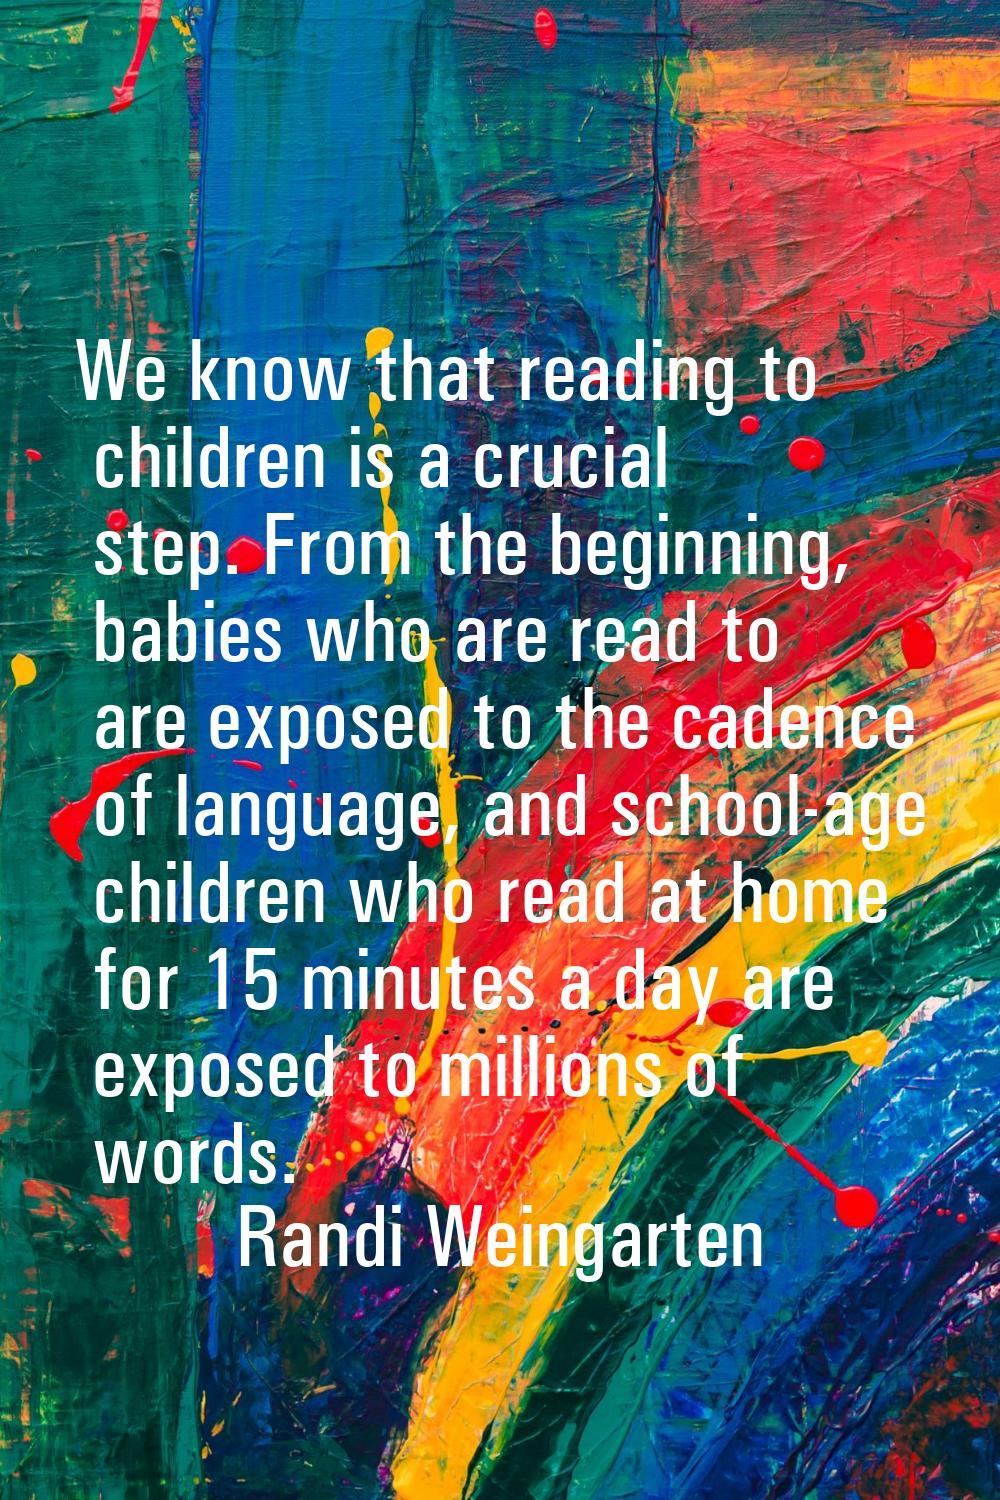 We know that reading to children is a crucial step. From the beginning, babies who are read to are 